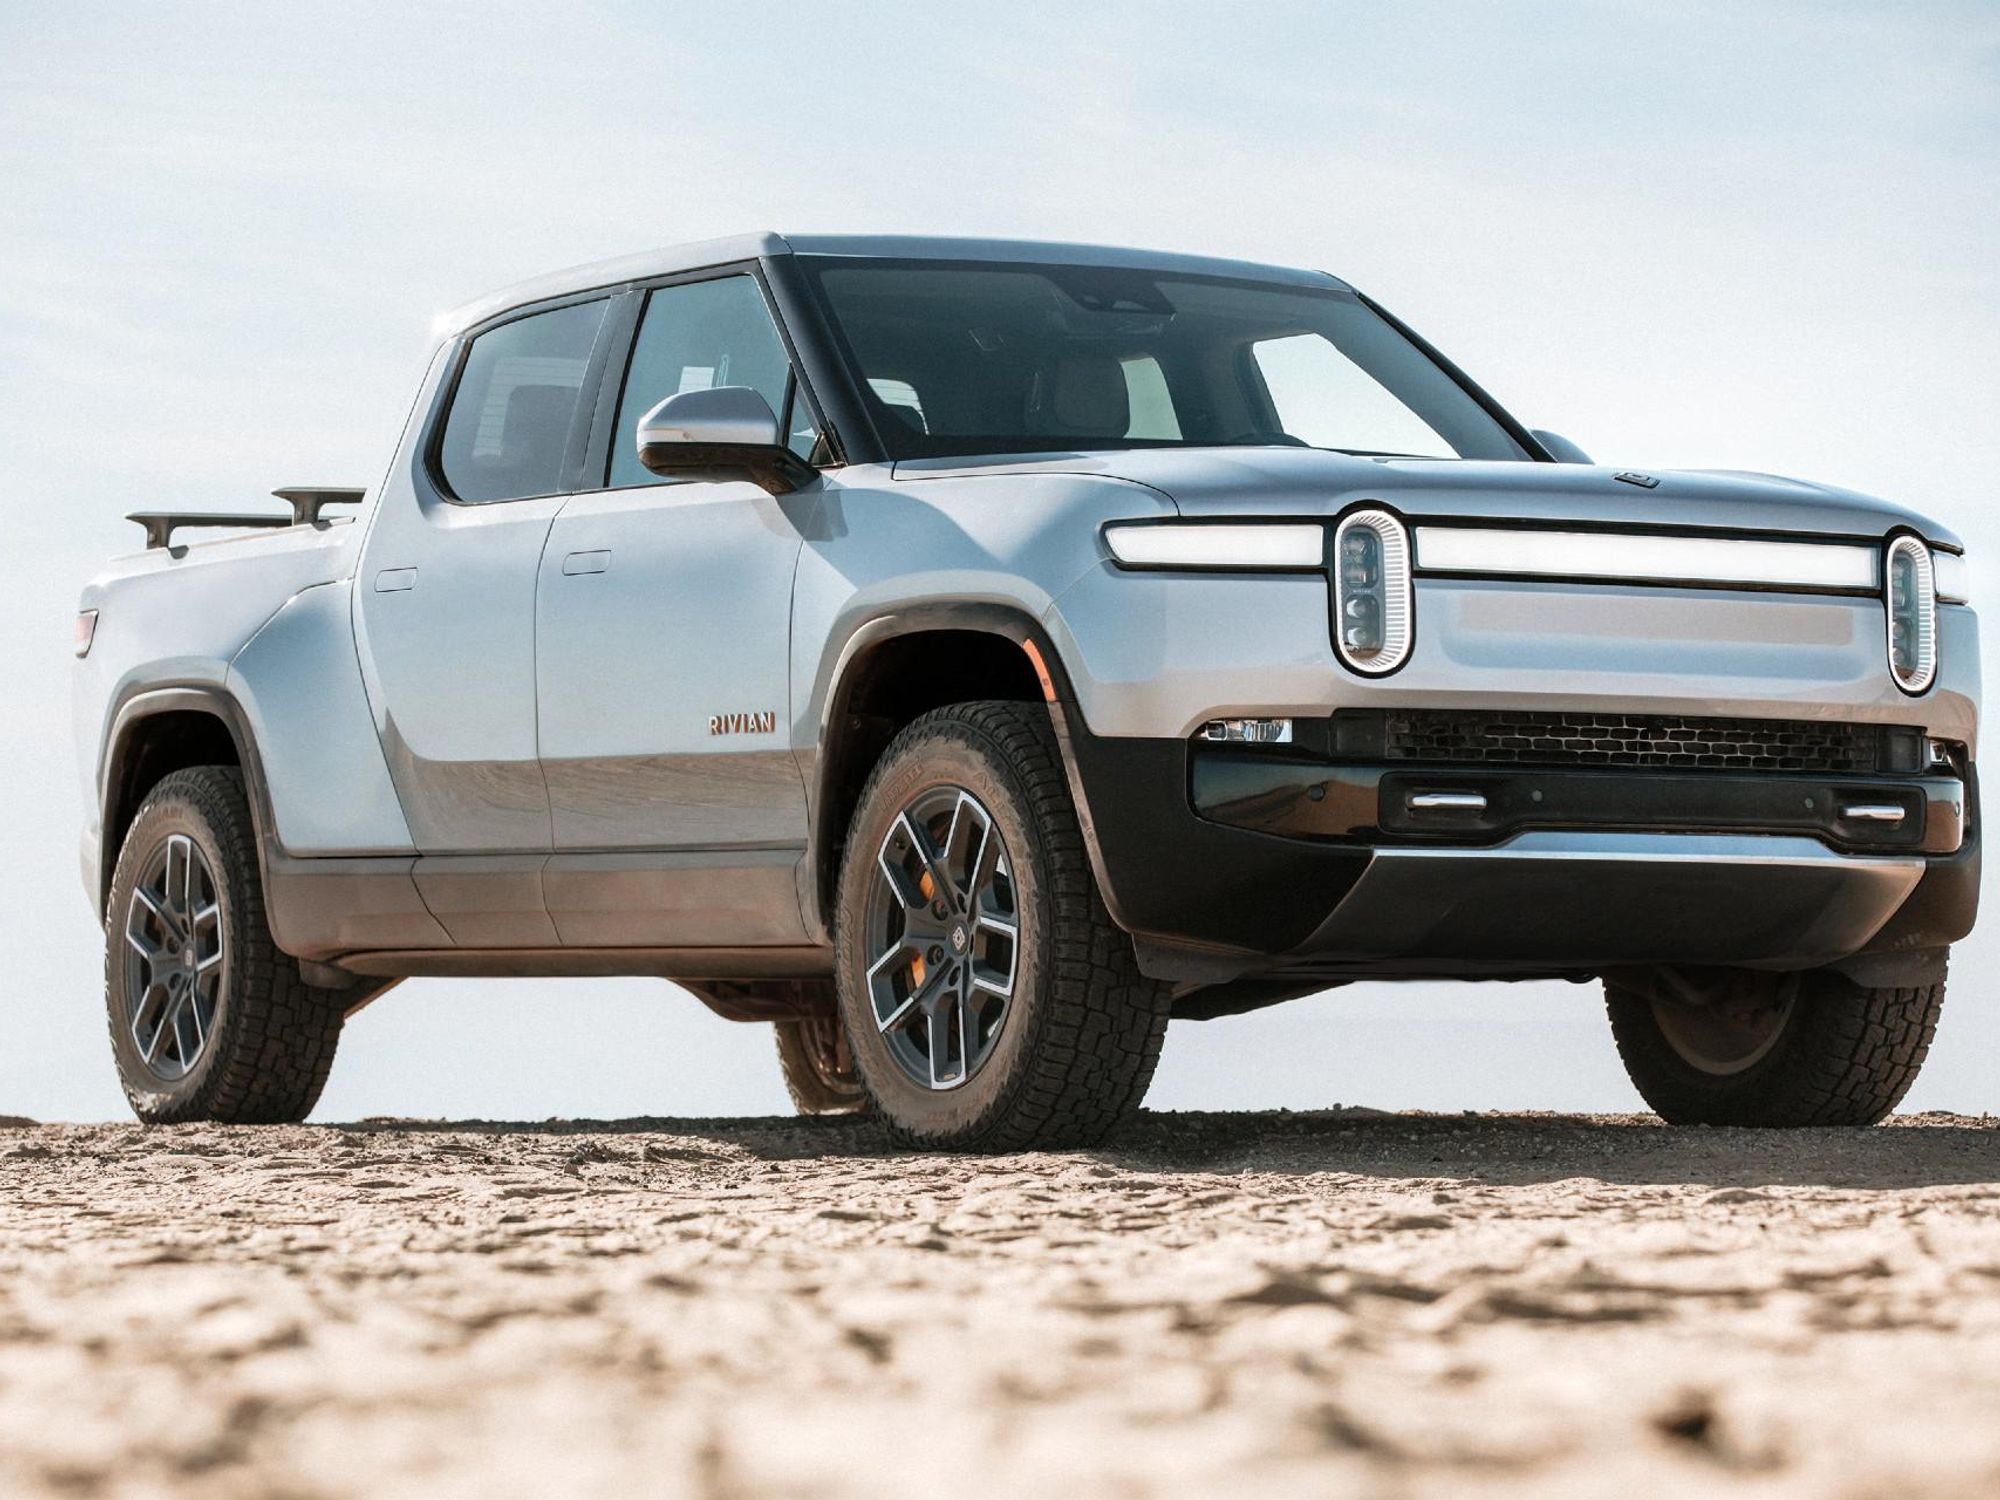 Invest in Rivian | Experience Quality, Cross-Over Appeal & More with this Unique Electric Vehicle